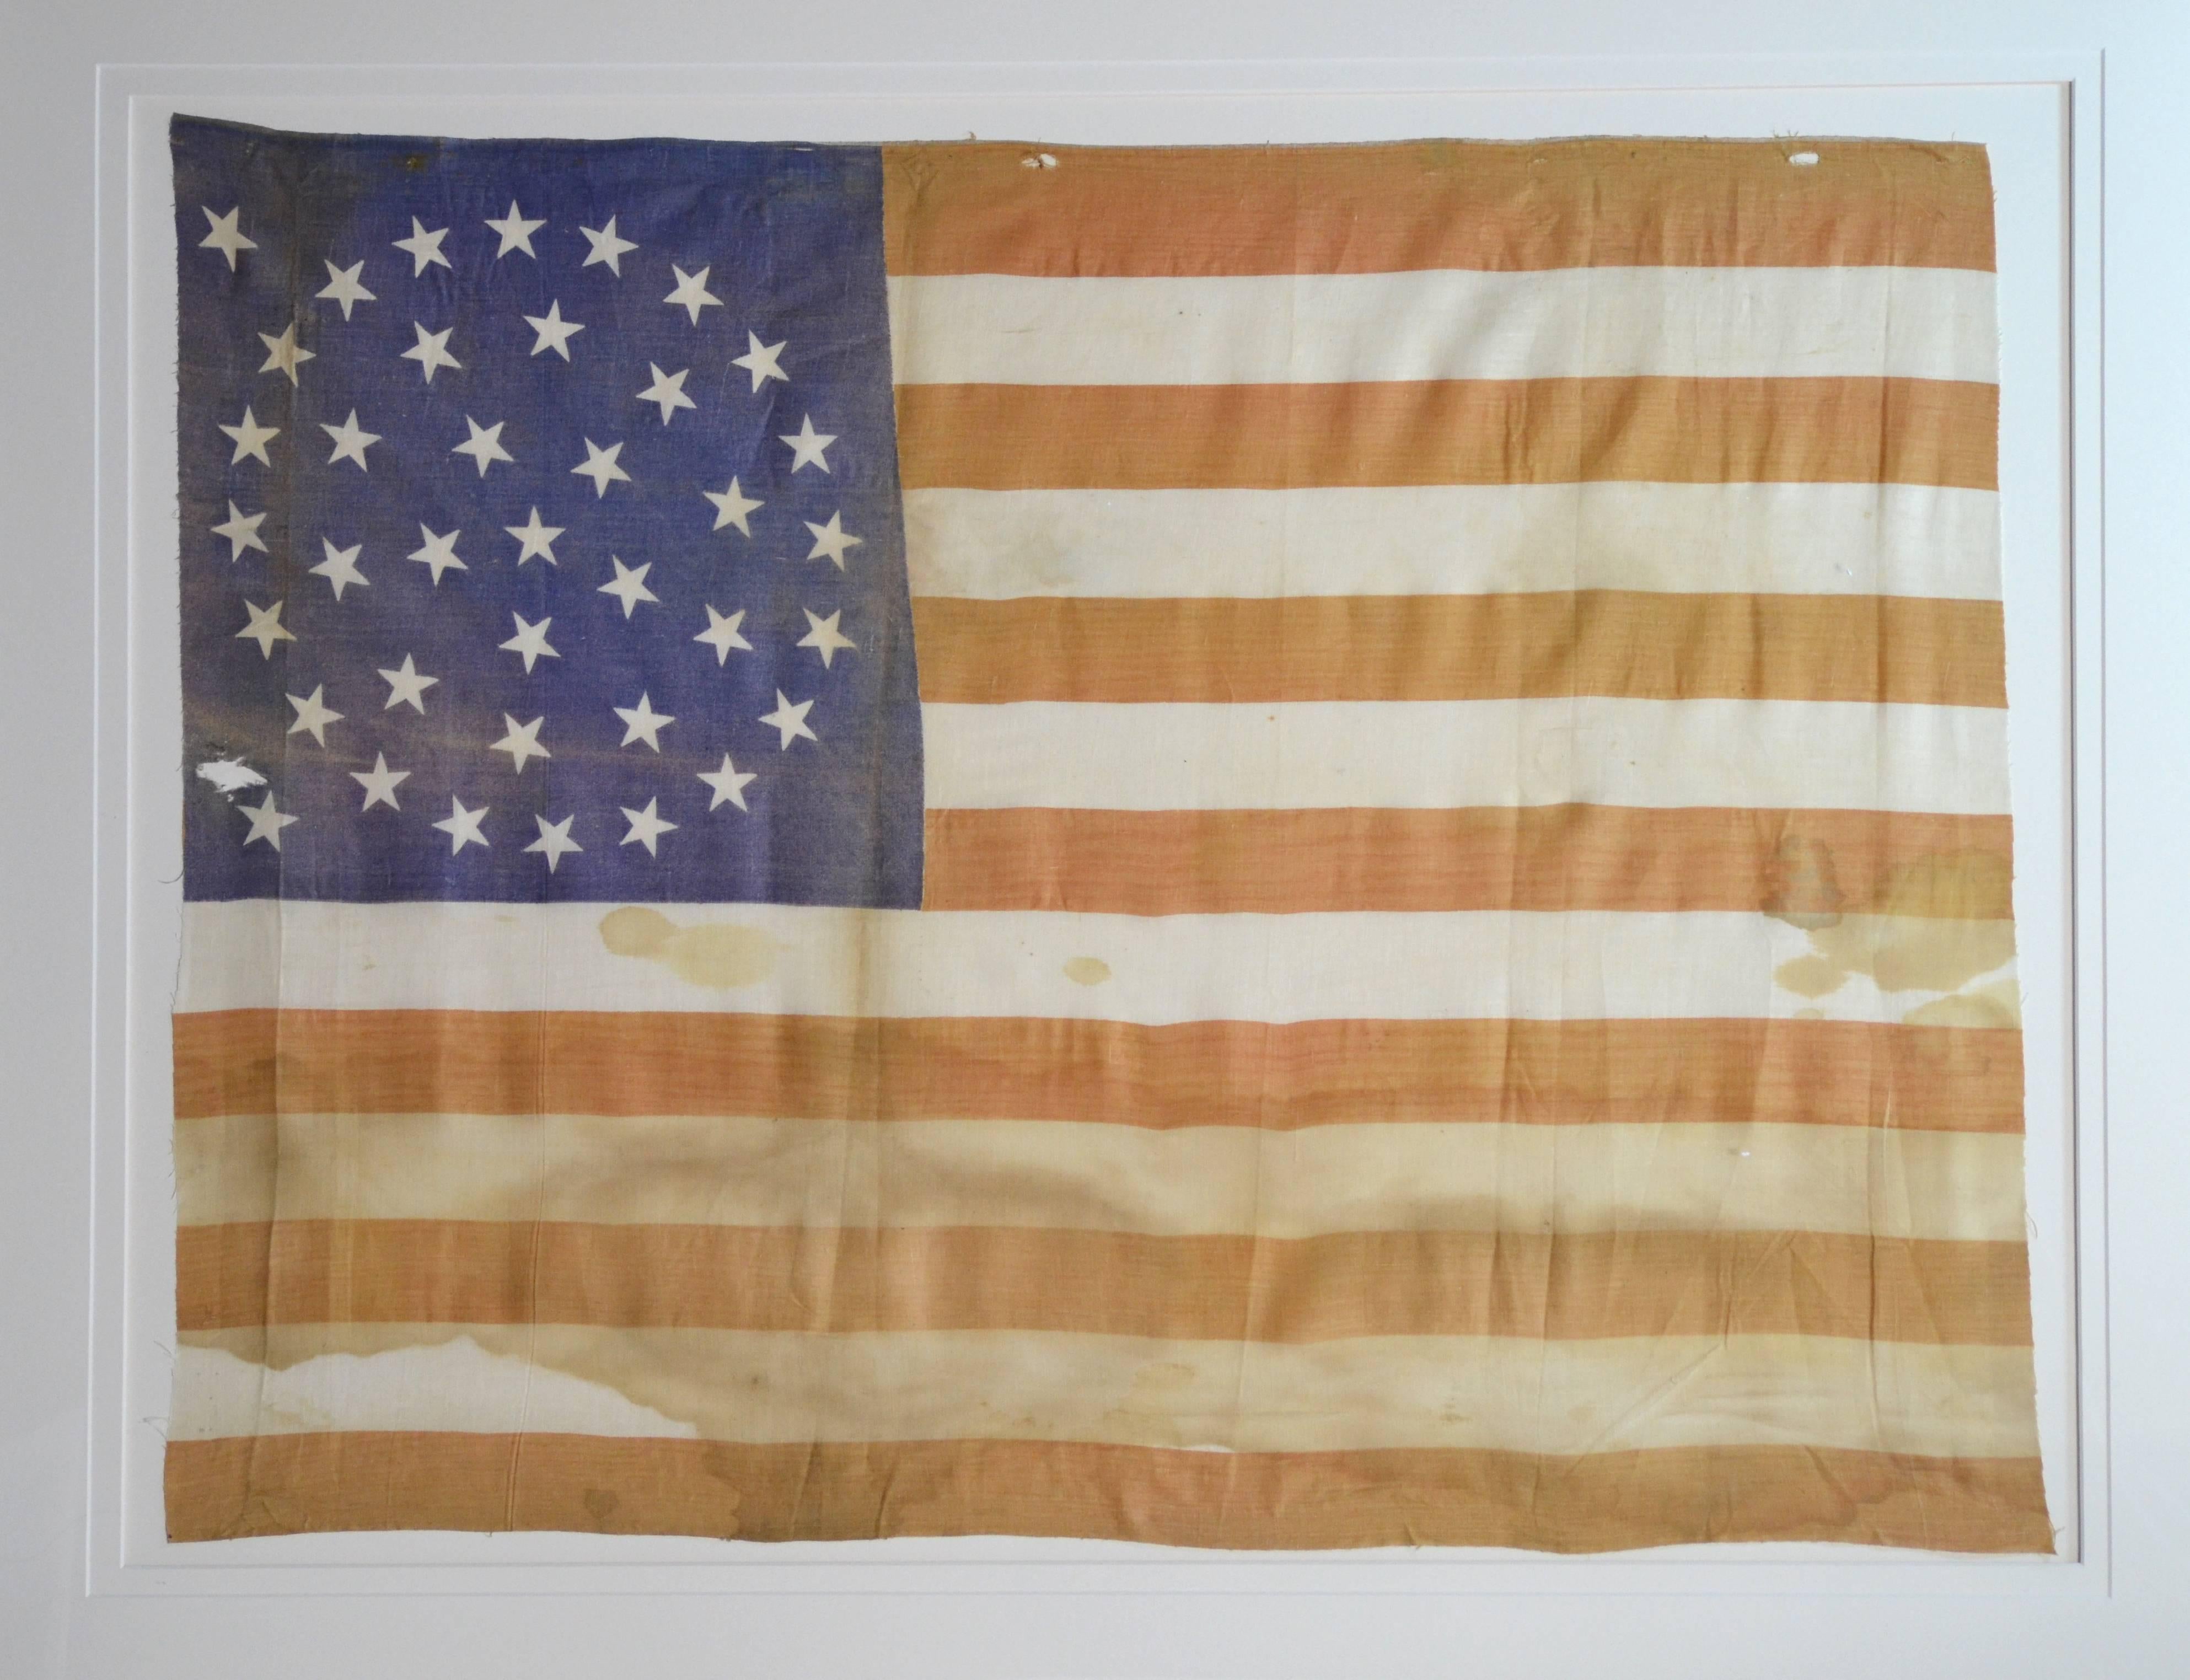 Rare Antique 38 Star Flag, circa 1876, with rare star arrangement called a triple wreath medallion with no center star. Made of printed cotton. Some staining and fading, but its still a fantastic flag which is a great piece of art. Flag size